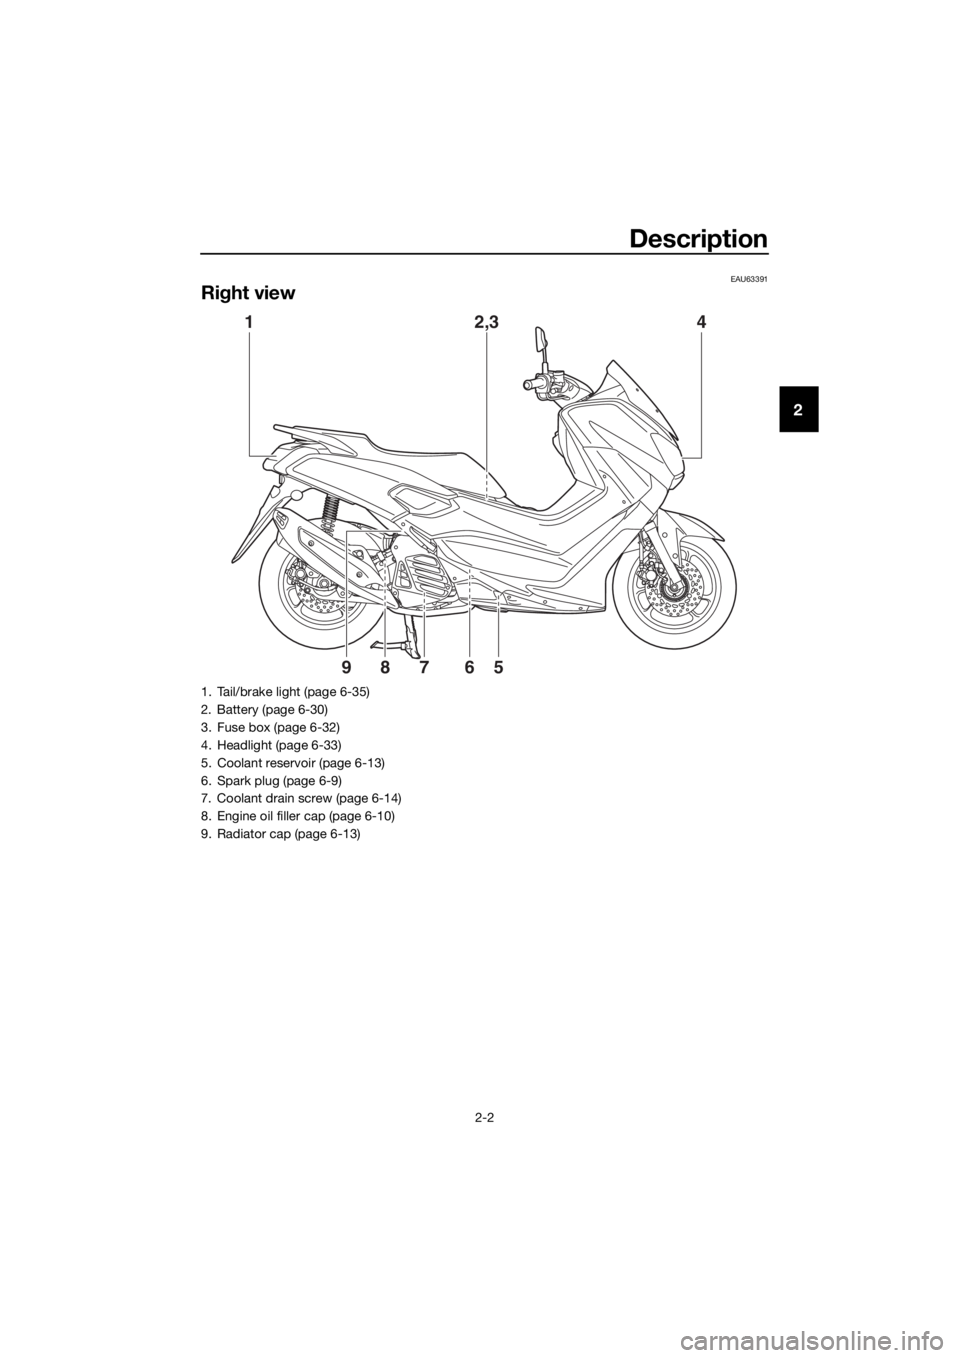 YAMAHA NMAX 150 2019  Owners Manual Description
2-2
2
EAU63391
Right view
1 2,34
567
89
1. Tail/brake light (page 6-35)
2. Battery (page 6-30)
3. Fuse box (page 6-32)
4. Headlight (page 6-33)
5. Coolant reservoir (page 6-13)
6. Spark pl